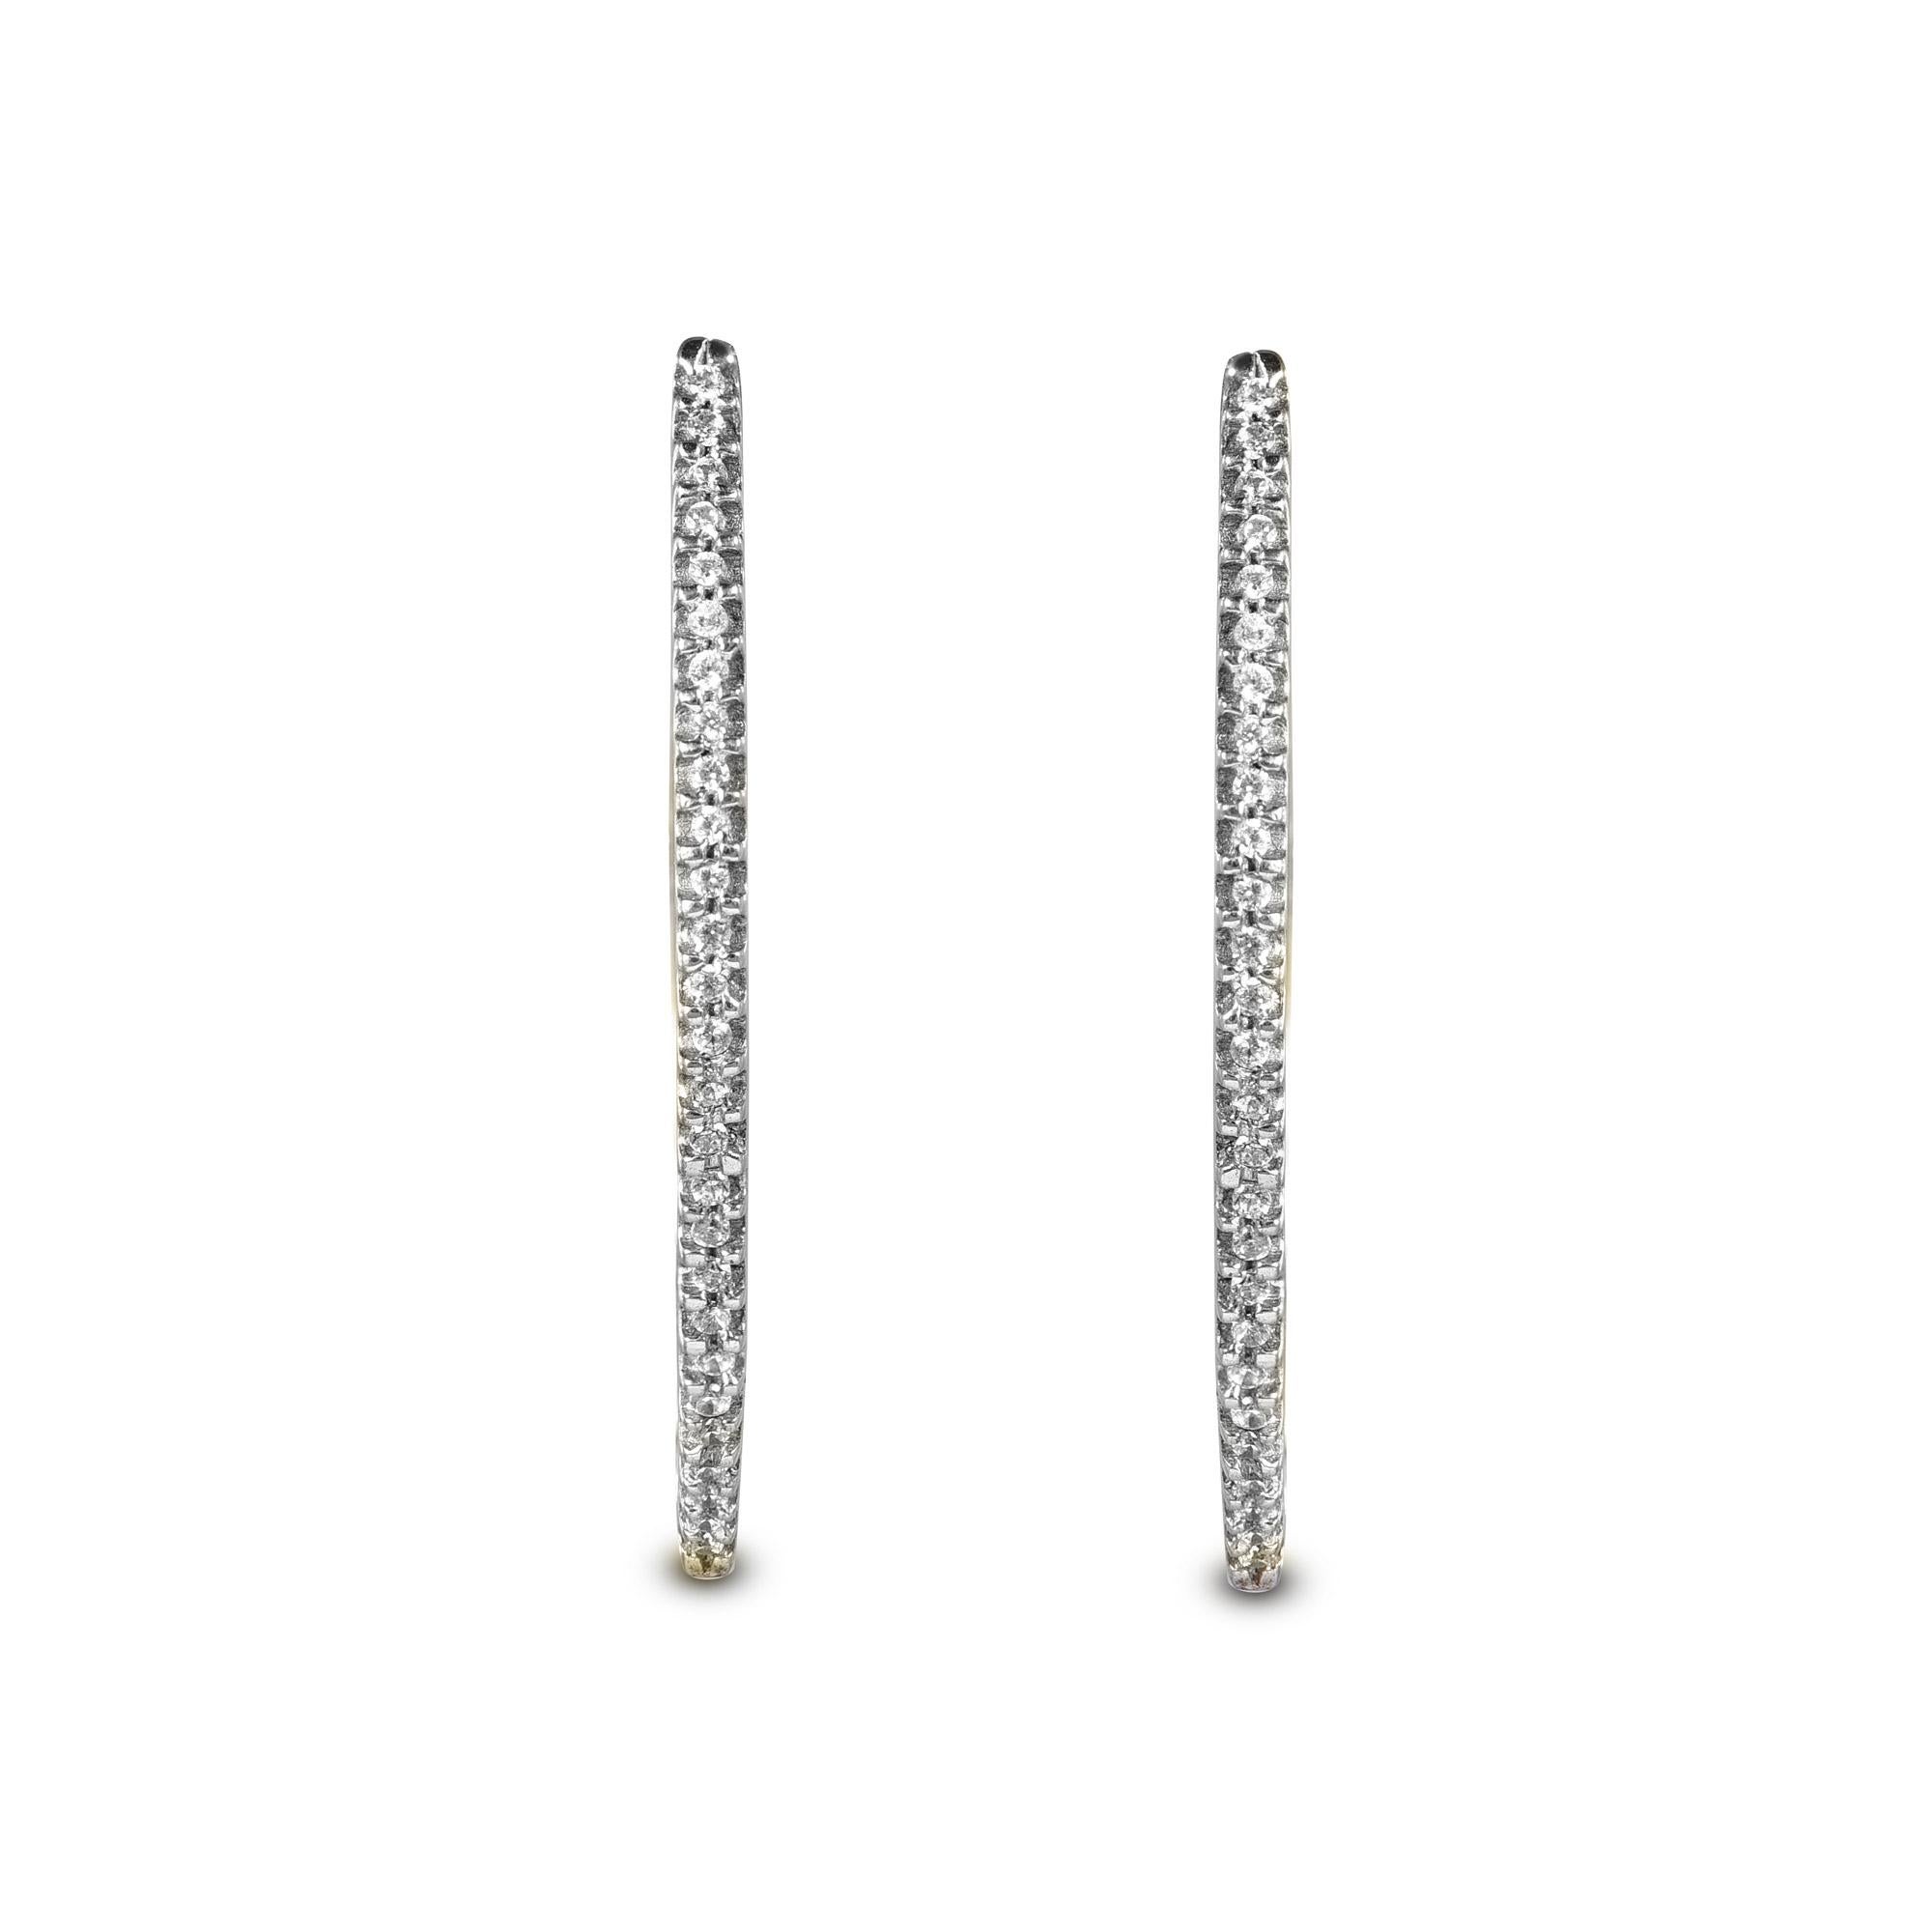 18 Karat Yellow Gold diamond hoop earrings With 54 Round Brilliant Diamonds timeless hoop earrings have 0.25 Carats of Round Brilliant set in prong setting, H-I color I1 clarity. These sparkling hoop earrings secure comfortably with post backs.
